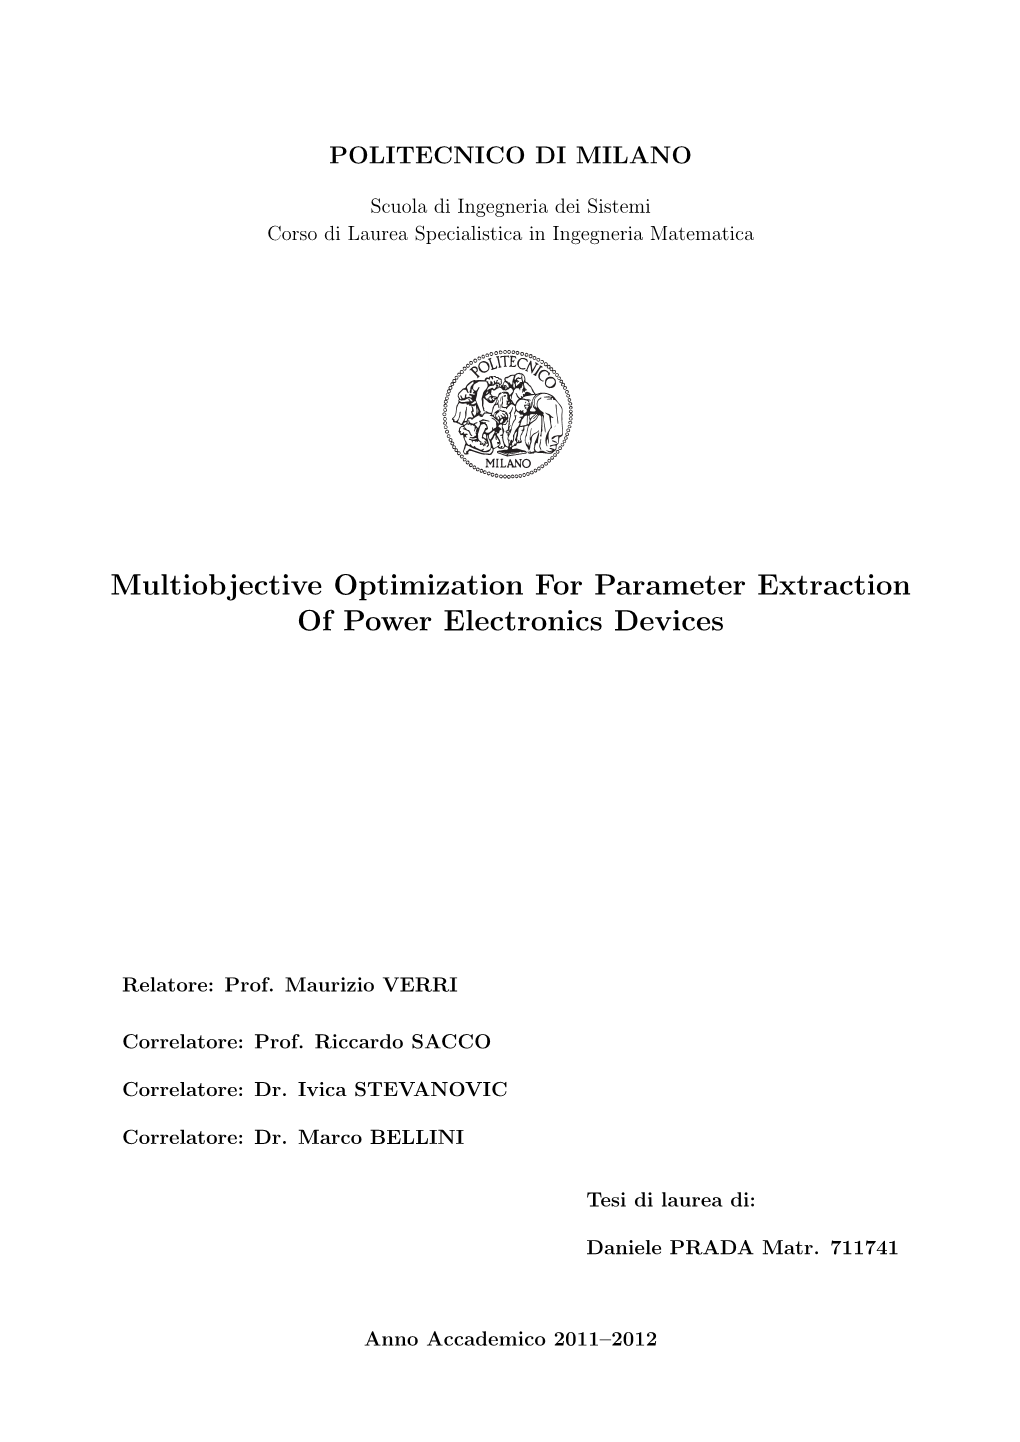 Multiobjective Optimization for Parameter Extraction of Power Electronics Devices